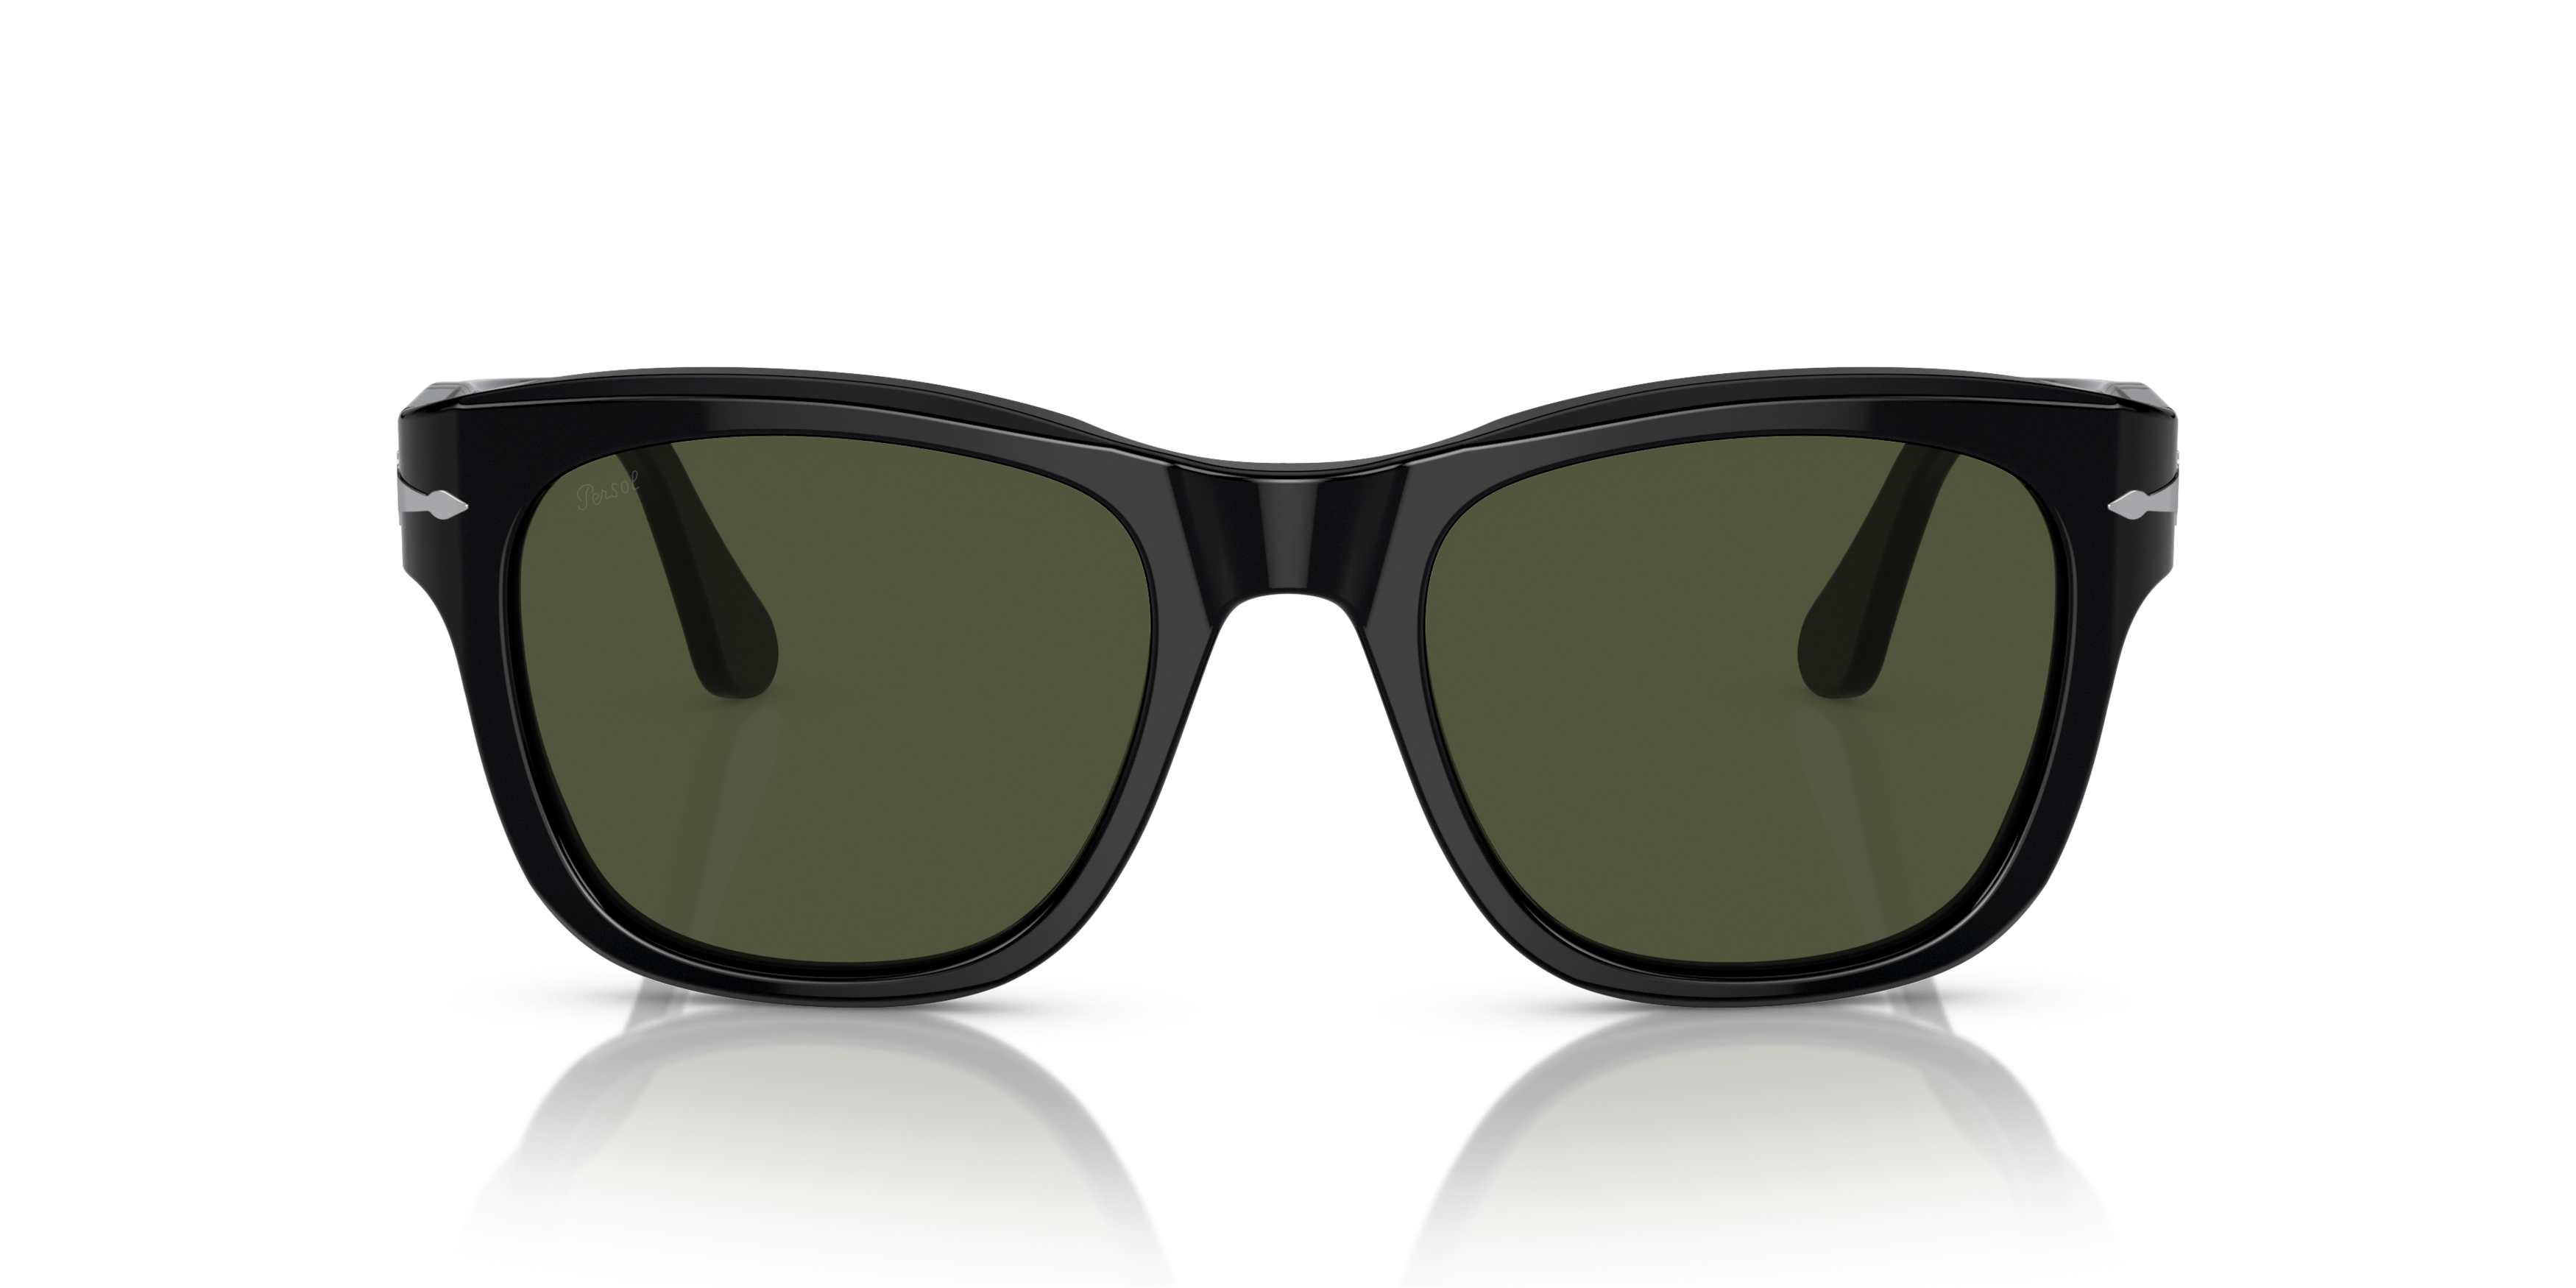 [products.image.front] PERSOL PO3313S 95/31